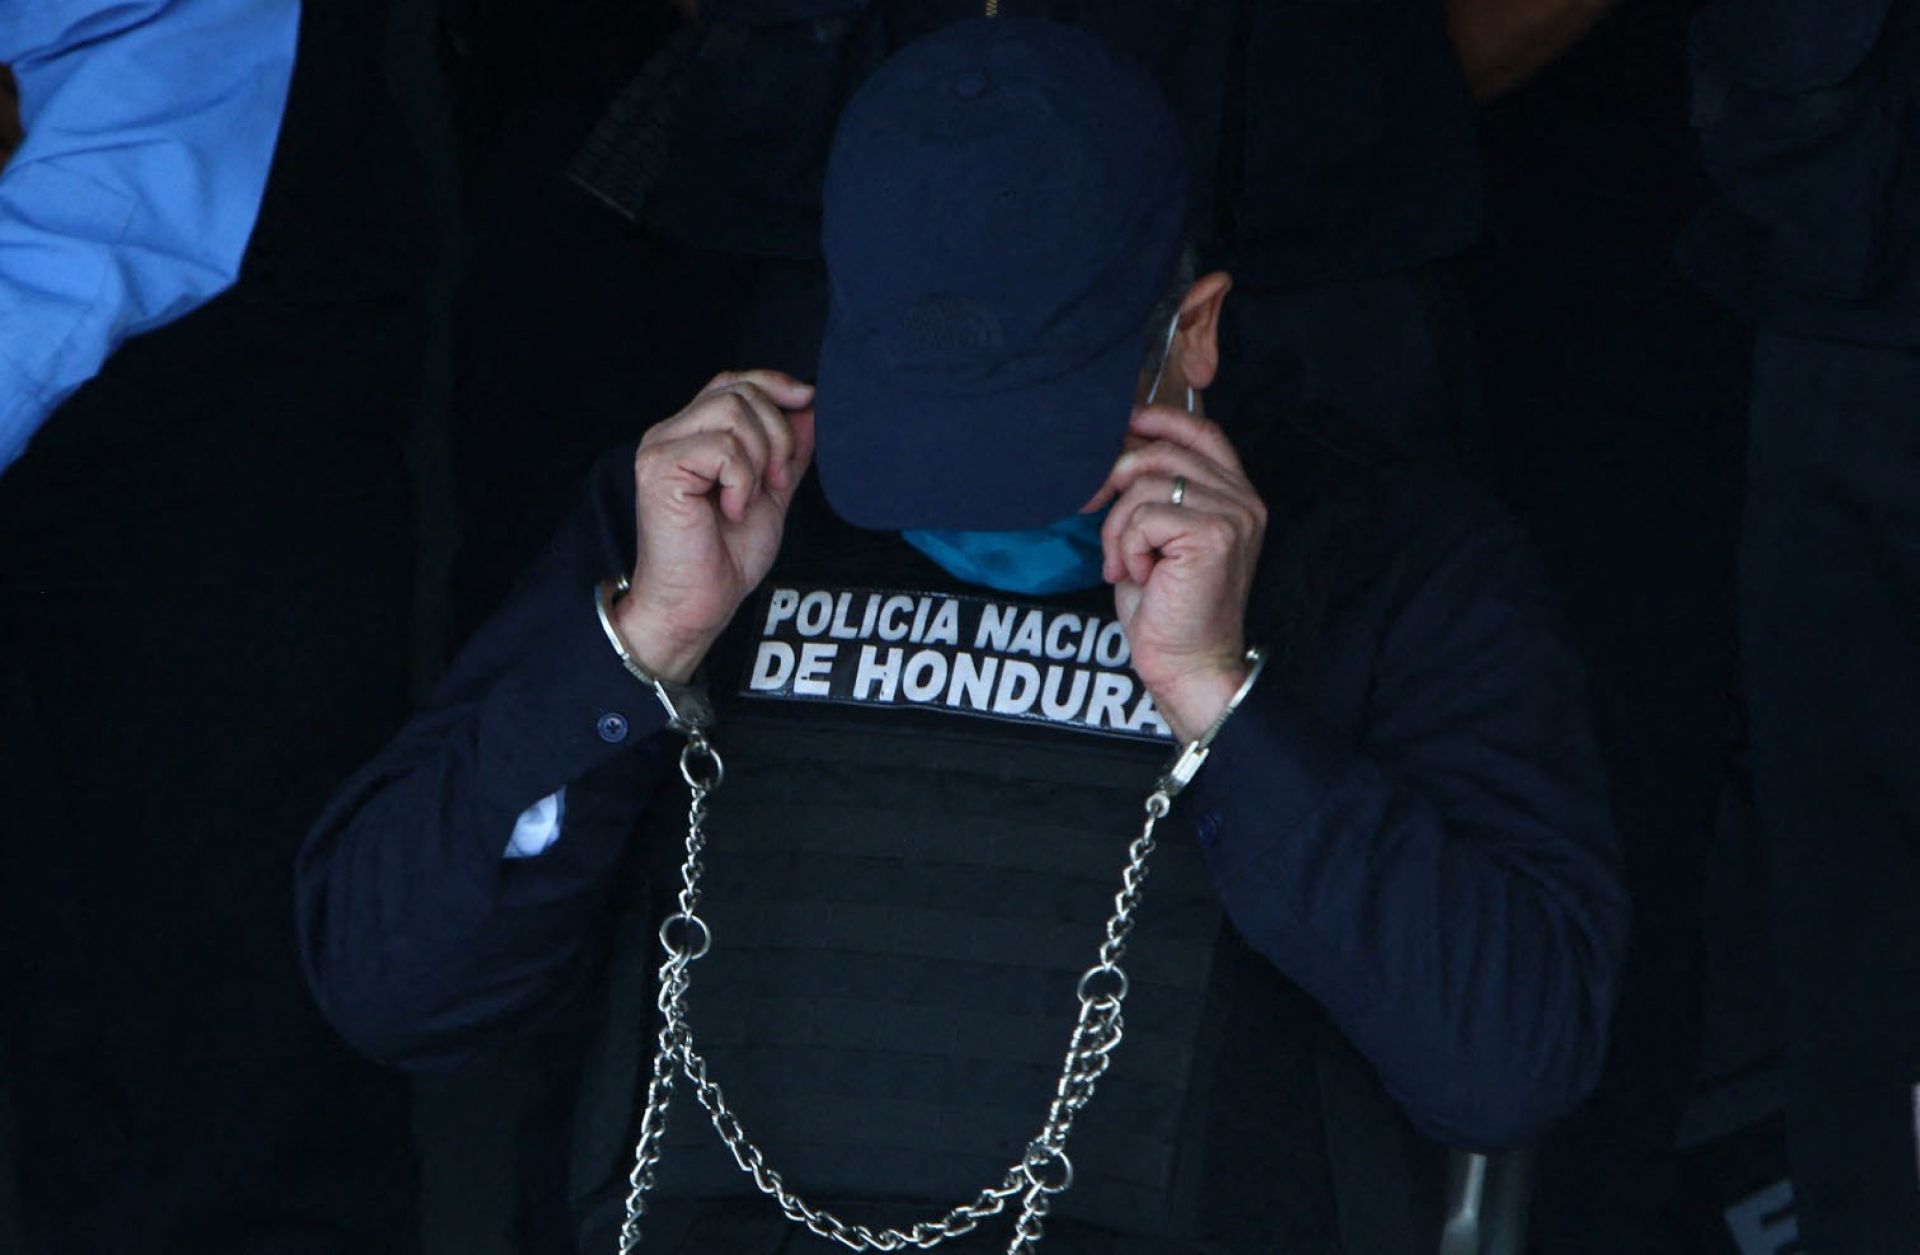 Juan Orlando Hernandez, the former president of Honduras, is seen handcuffed at the headquarters of the country’s police force in Tegucigalpa on Feb. 15, 2022. He was arrested after receiving an extradition order from the United States. 